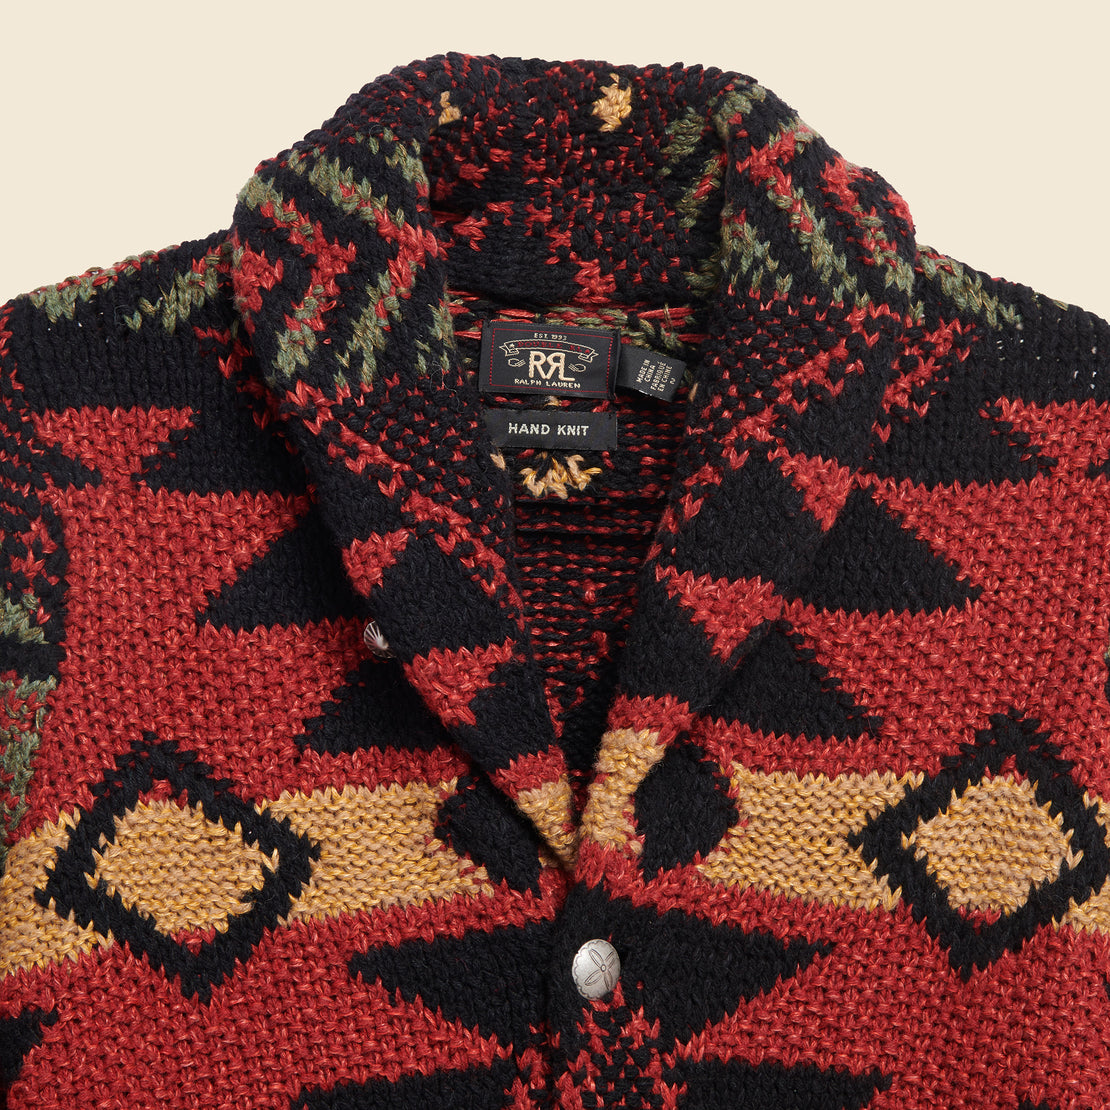 Hand-Knit Ranch Cardigan - Red/Black - RRL - STAG Provisions - W - Tops - Sweater